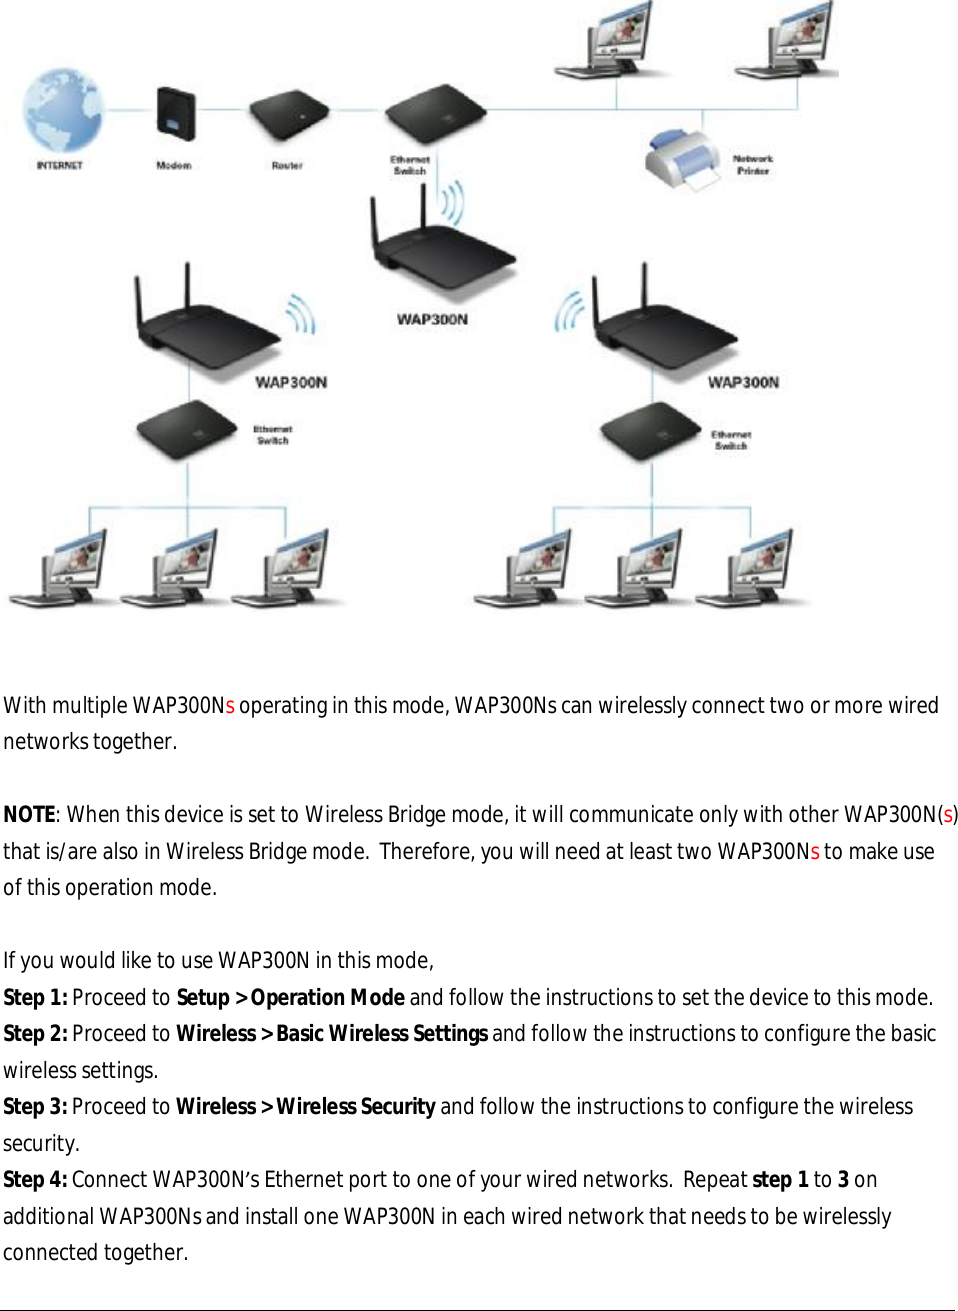    With multiple WAP300Ns operating in this mode, WAP300Ns can wirelessly connect two or more wired networks together.  NOTE: When this device is set to Wireless Bridge mode, it will communicate only with other WAP300N(s) that is/are also in Wireless Bridge mode.  Therefore, you will need at least two WAP300Ns to make use of this operation mode.  If you would like to use WAP300N in this mode, Step 1: Proceed to Setup &gt; Operation Mode and follow the instructions to set the device to this mode. Step 2: Proceed to Wireless &gt; Basic Wireless Settings and follow the instructions to configure the basic wireless settings. Step 3: Proceed to Wireless &gt; Wireless Security and follow the instructions to configure the wireless security. Step 4: Connect WAP300N’s Ethernet port to one of your wired networks.  Repeat step 1 to 3 on additional WAP300Ns and install one WAP300N in each wired network that needs to be wirelessly connected together.  